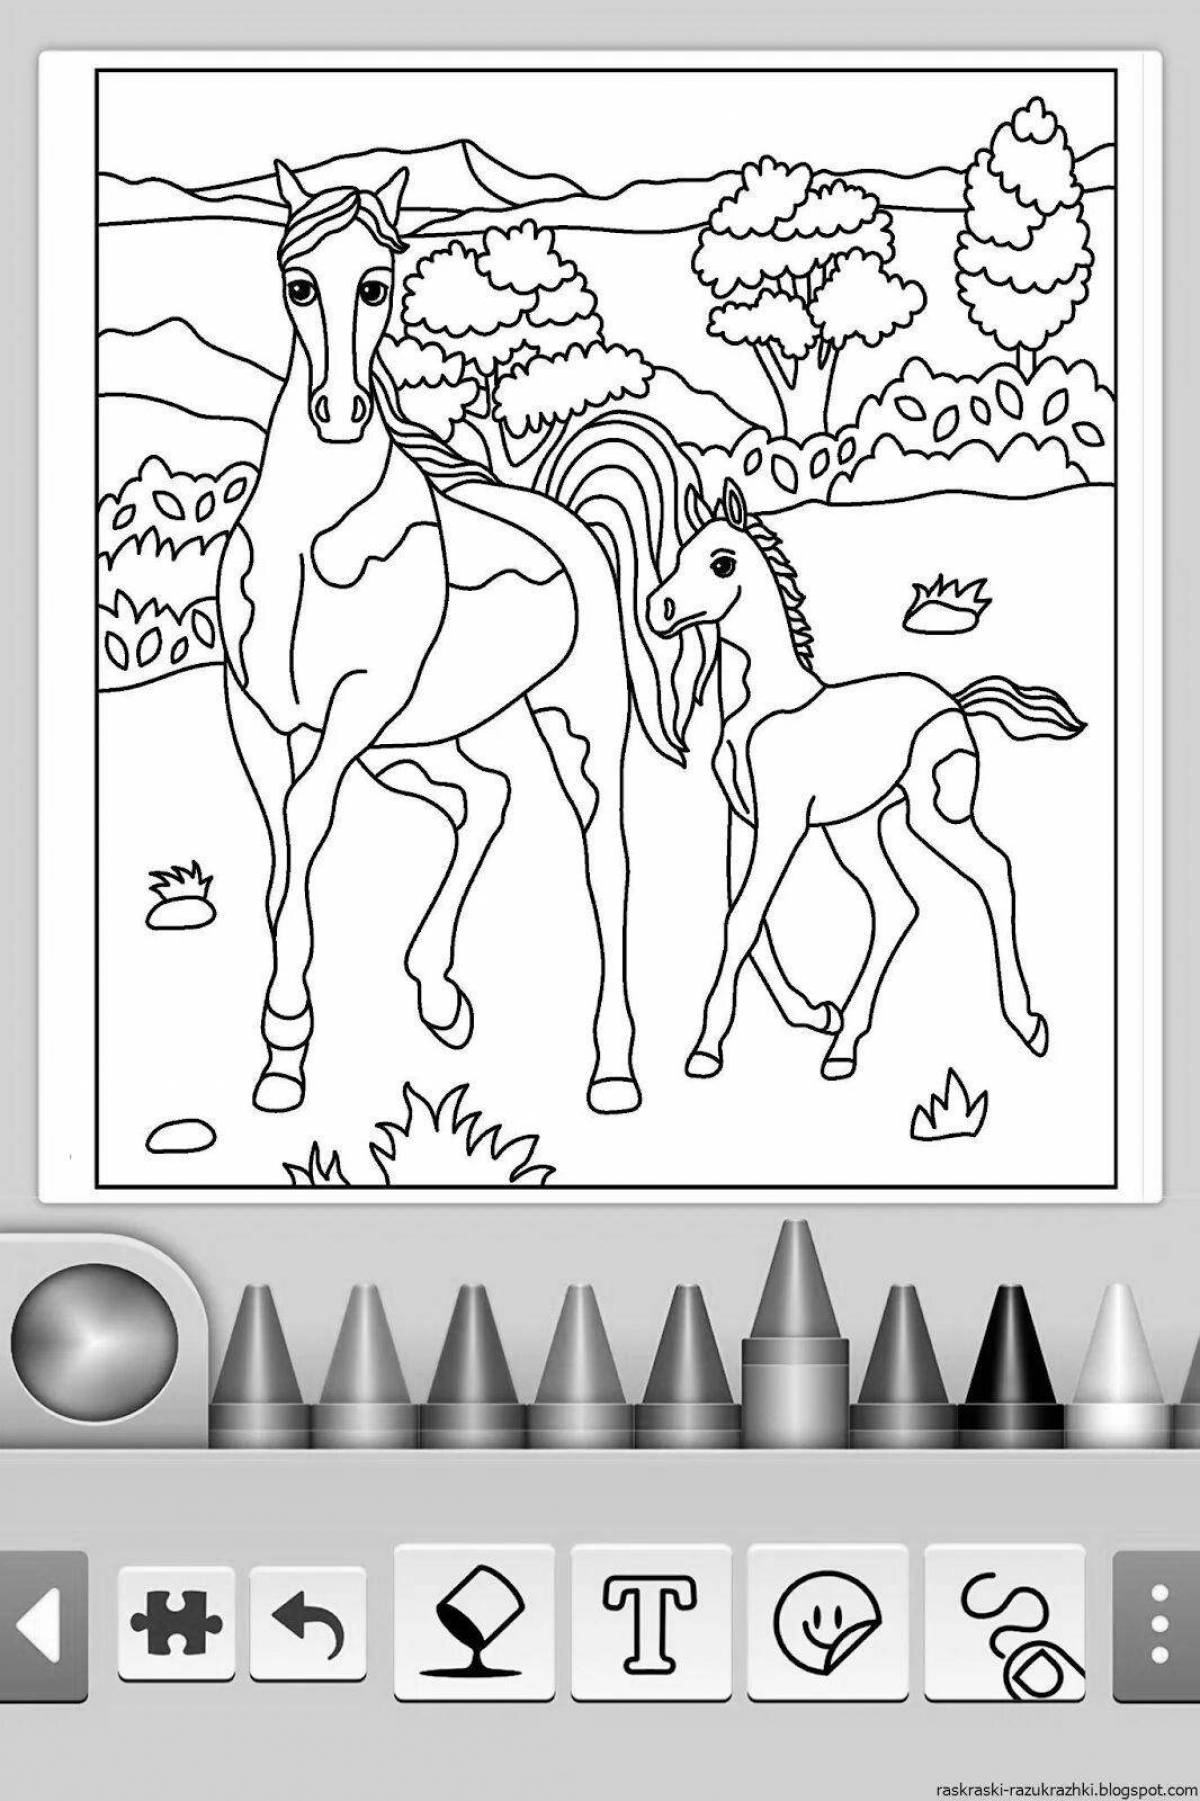 Coloring game without registration by numbers on the phone